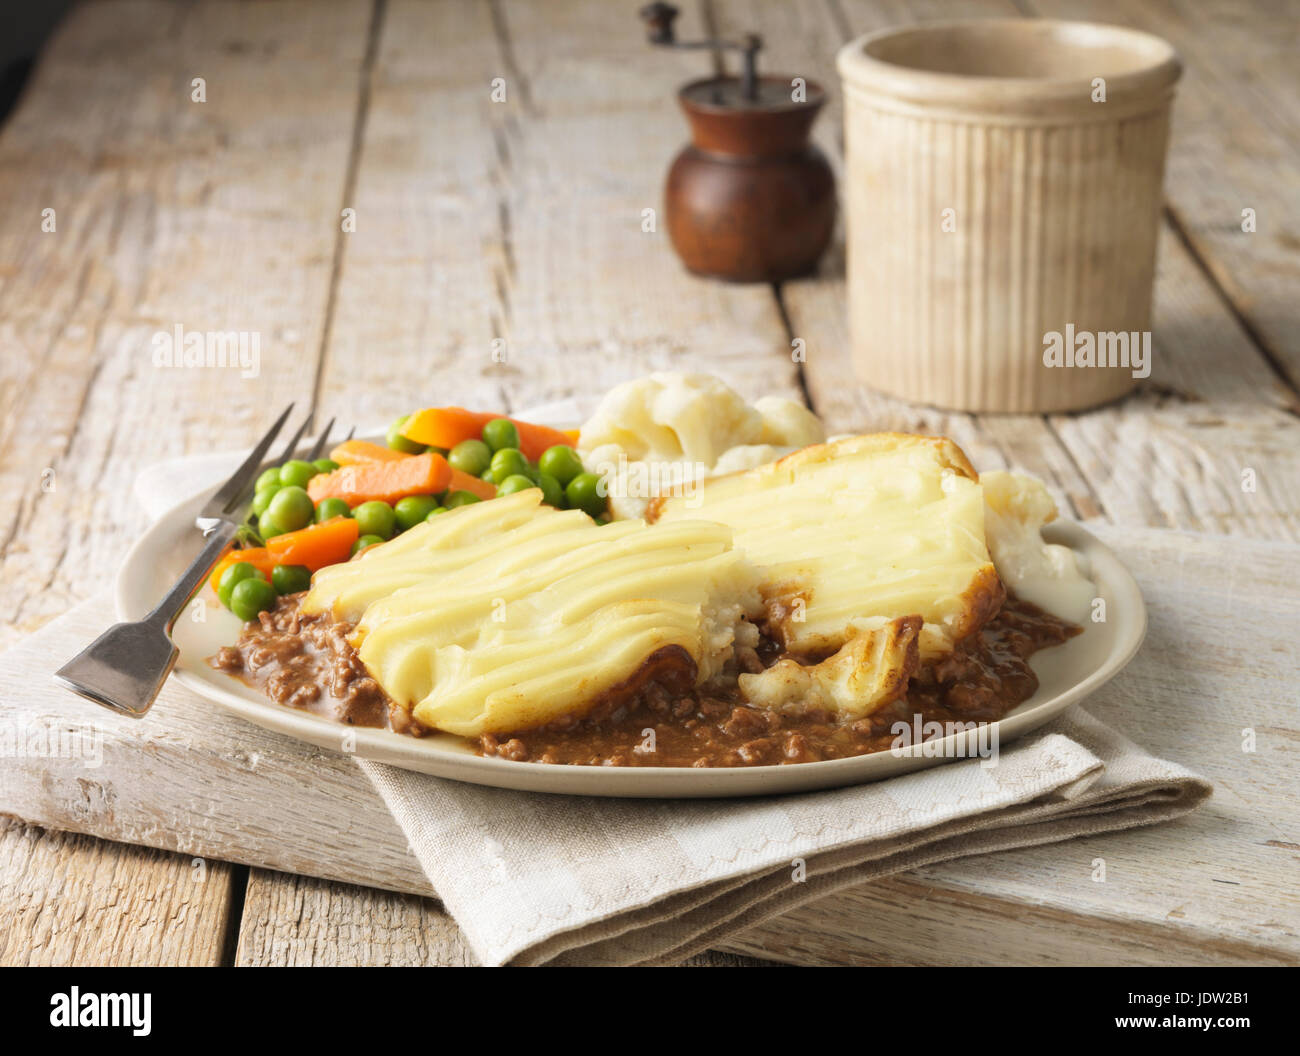 Plate of cottage pie with vegetables Stock Photo